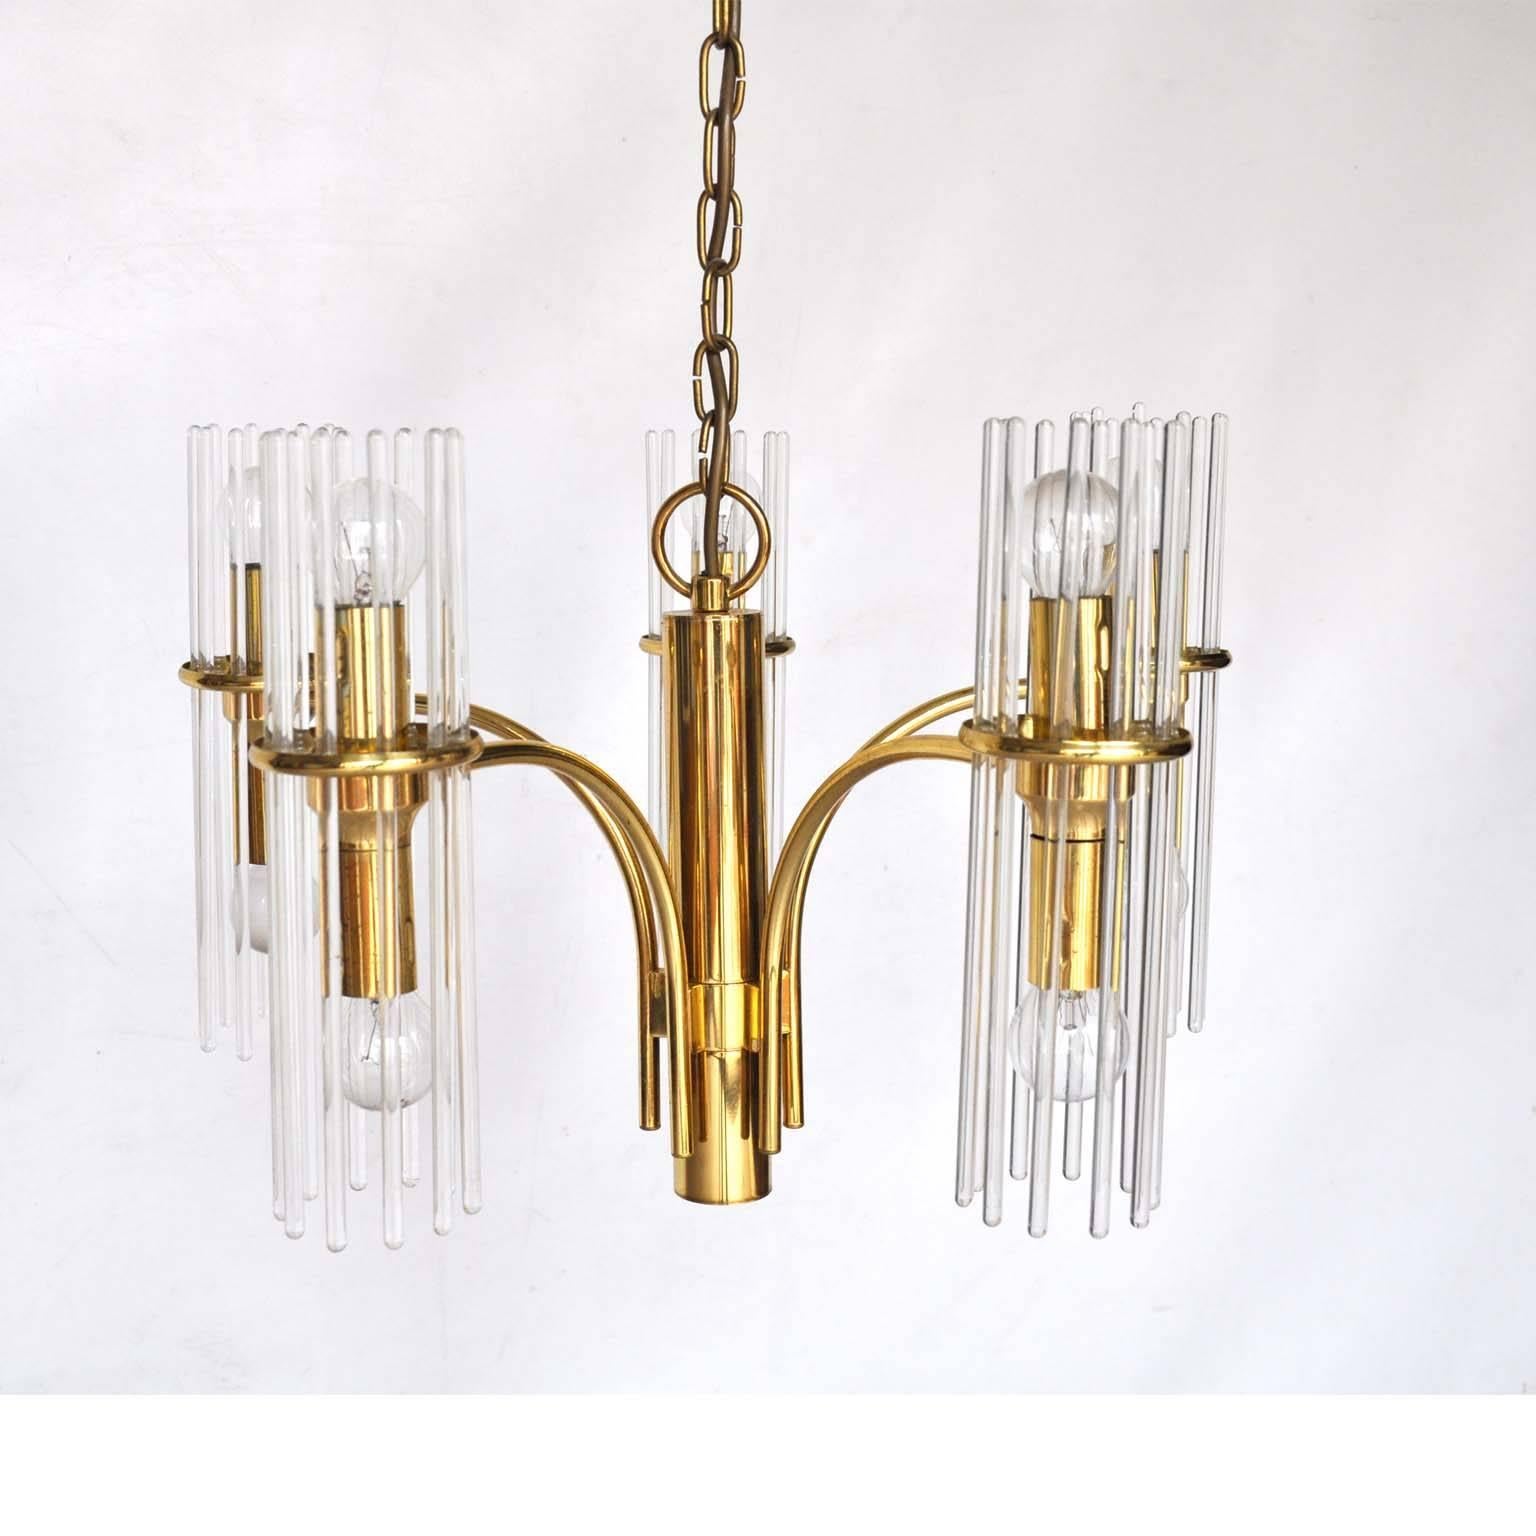 Chandelier designed by Geatano Sciolari.

This chandelier is made of brass with glass rods. When on, the rods diffuse the light of the bulbs which gives a beautiful effect.

In original condition. Four rods have been replaced.

Marked with a